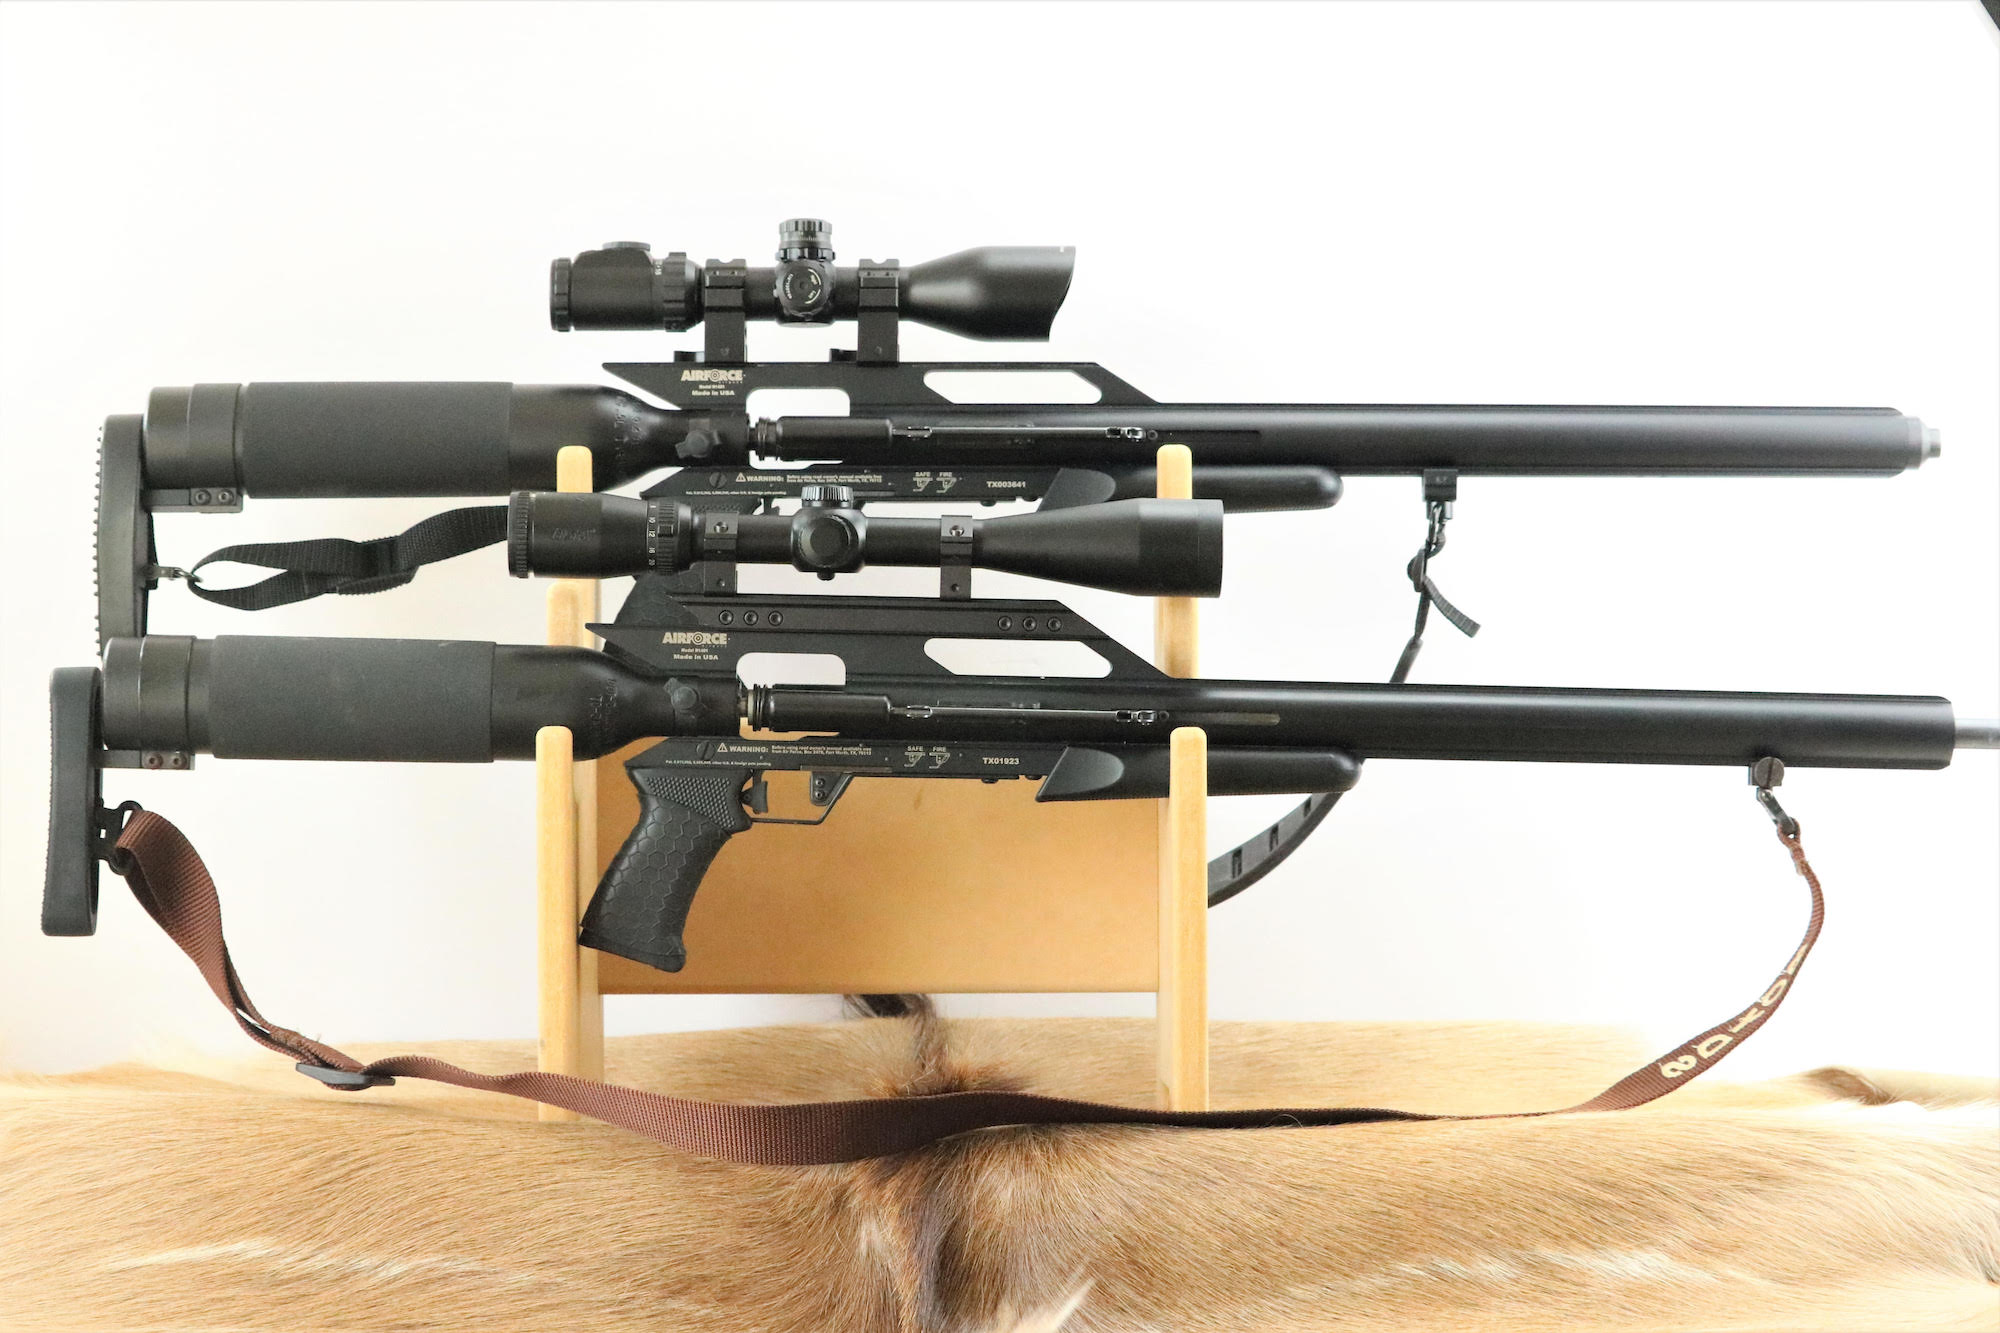 The AirForce Texan .308 and .357 are our picks for best air rifles.